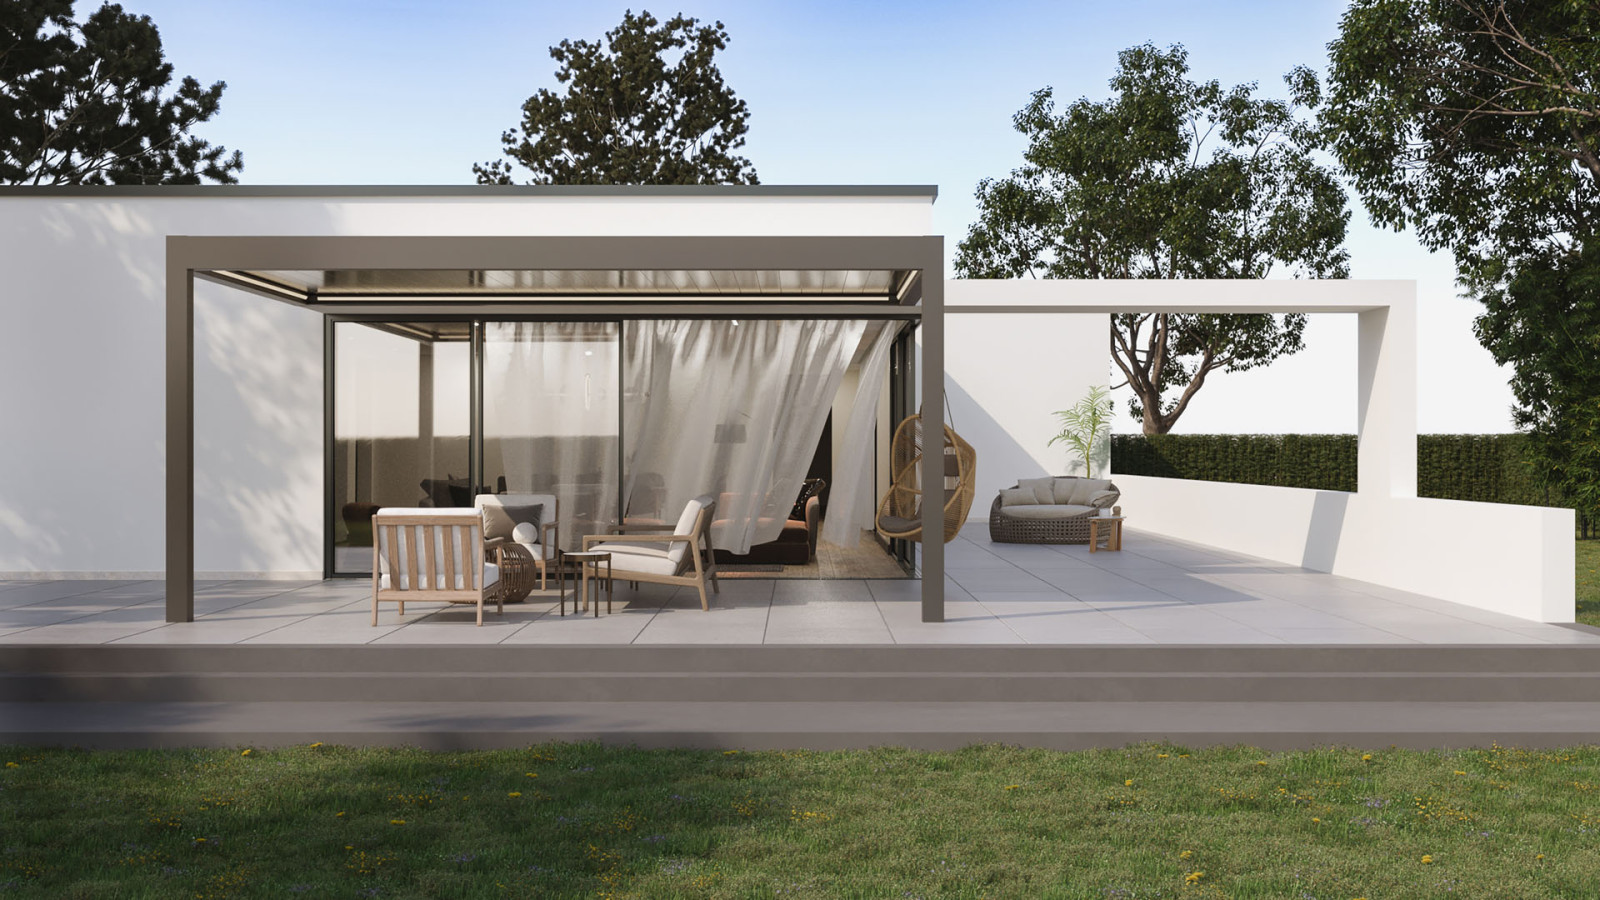 Outdoor seating on a patio with covered area and furniture under fixed bioclimatic pergola.